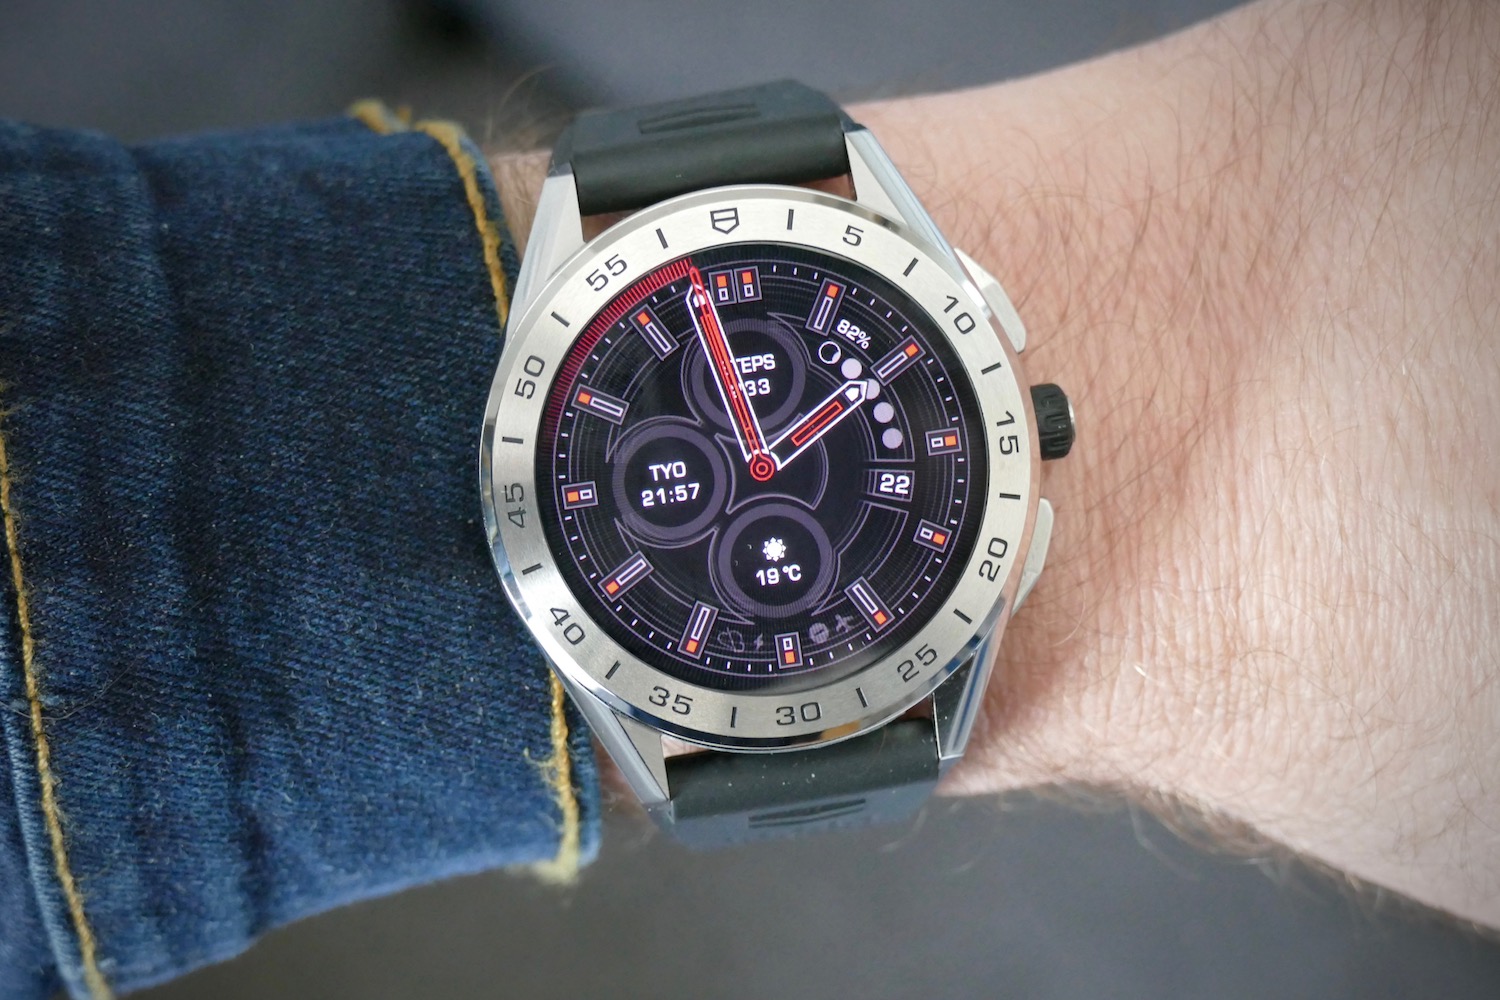 tag heuer connected 2020 smartwatch review 01c face